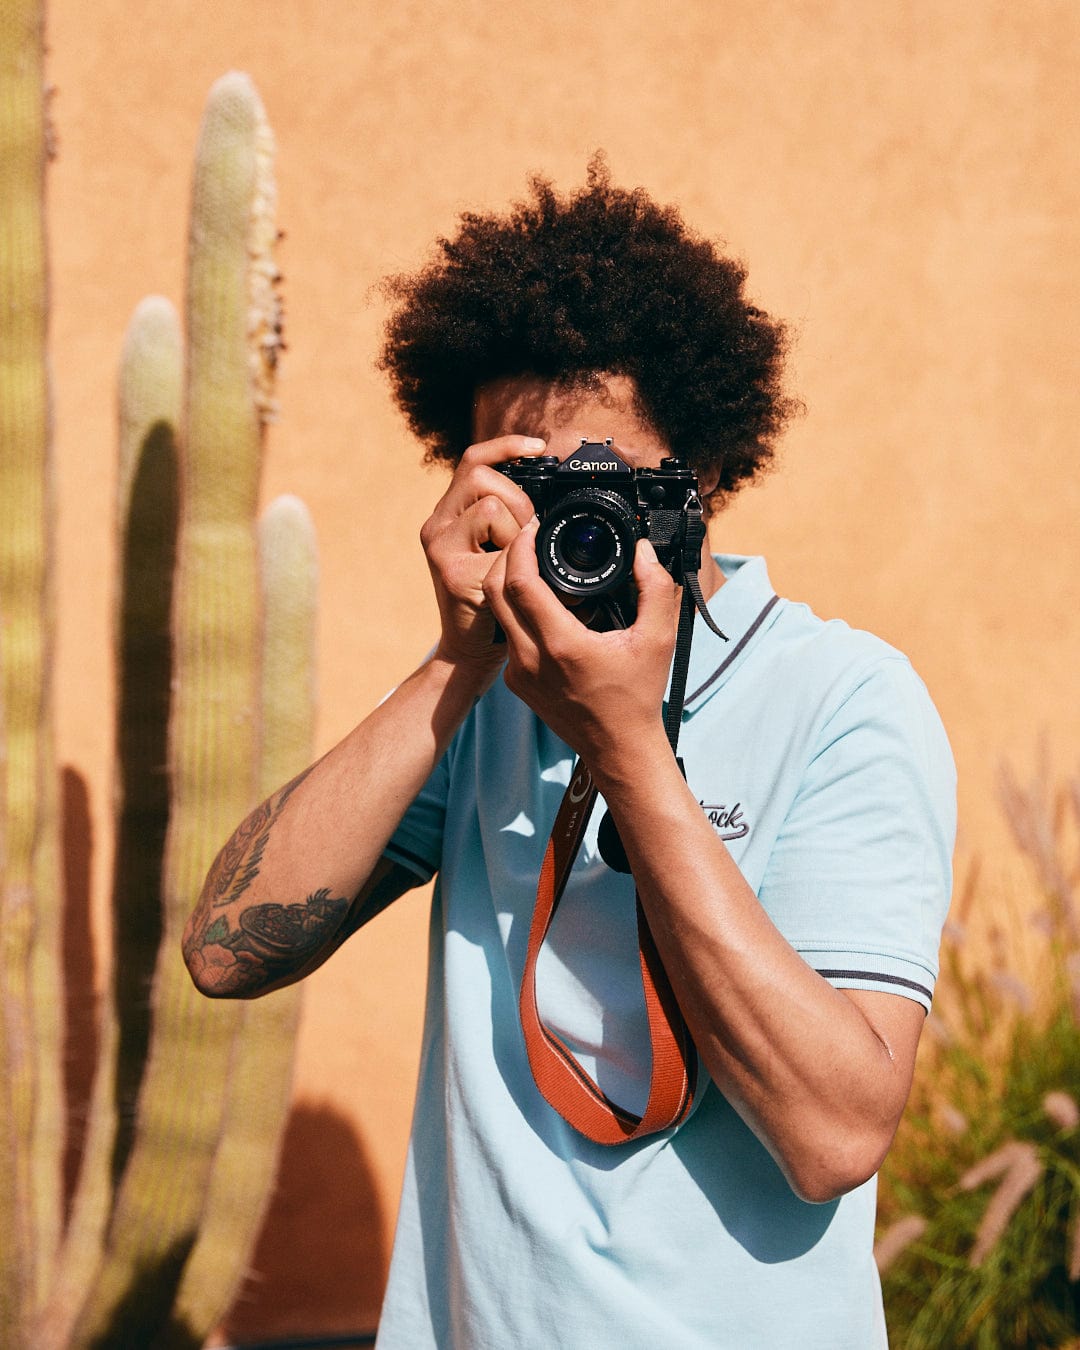 Person in a Strike Logo - Mens Short Sleeve Polo Shirt - Light Blue by Saltrock taking a photo with a camera in front of a tall cactus and an orange wall.